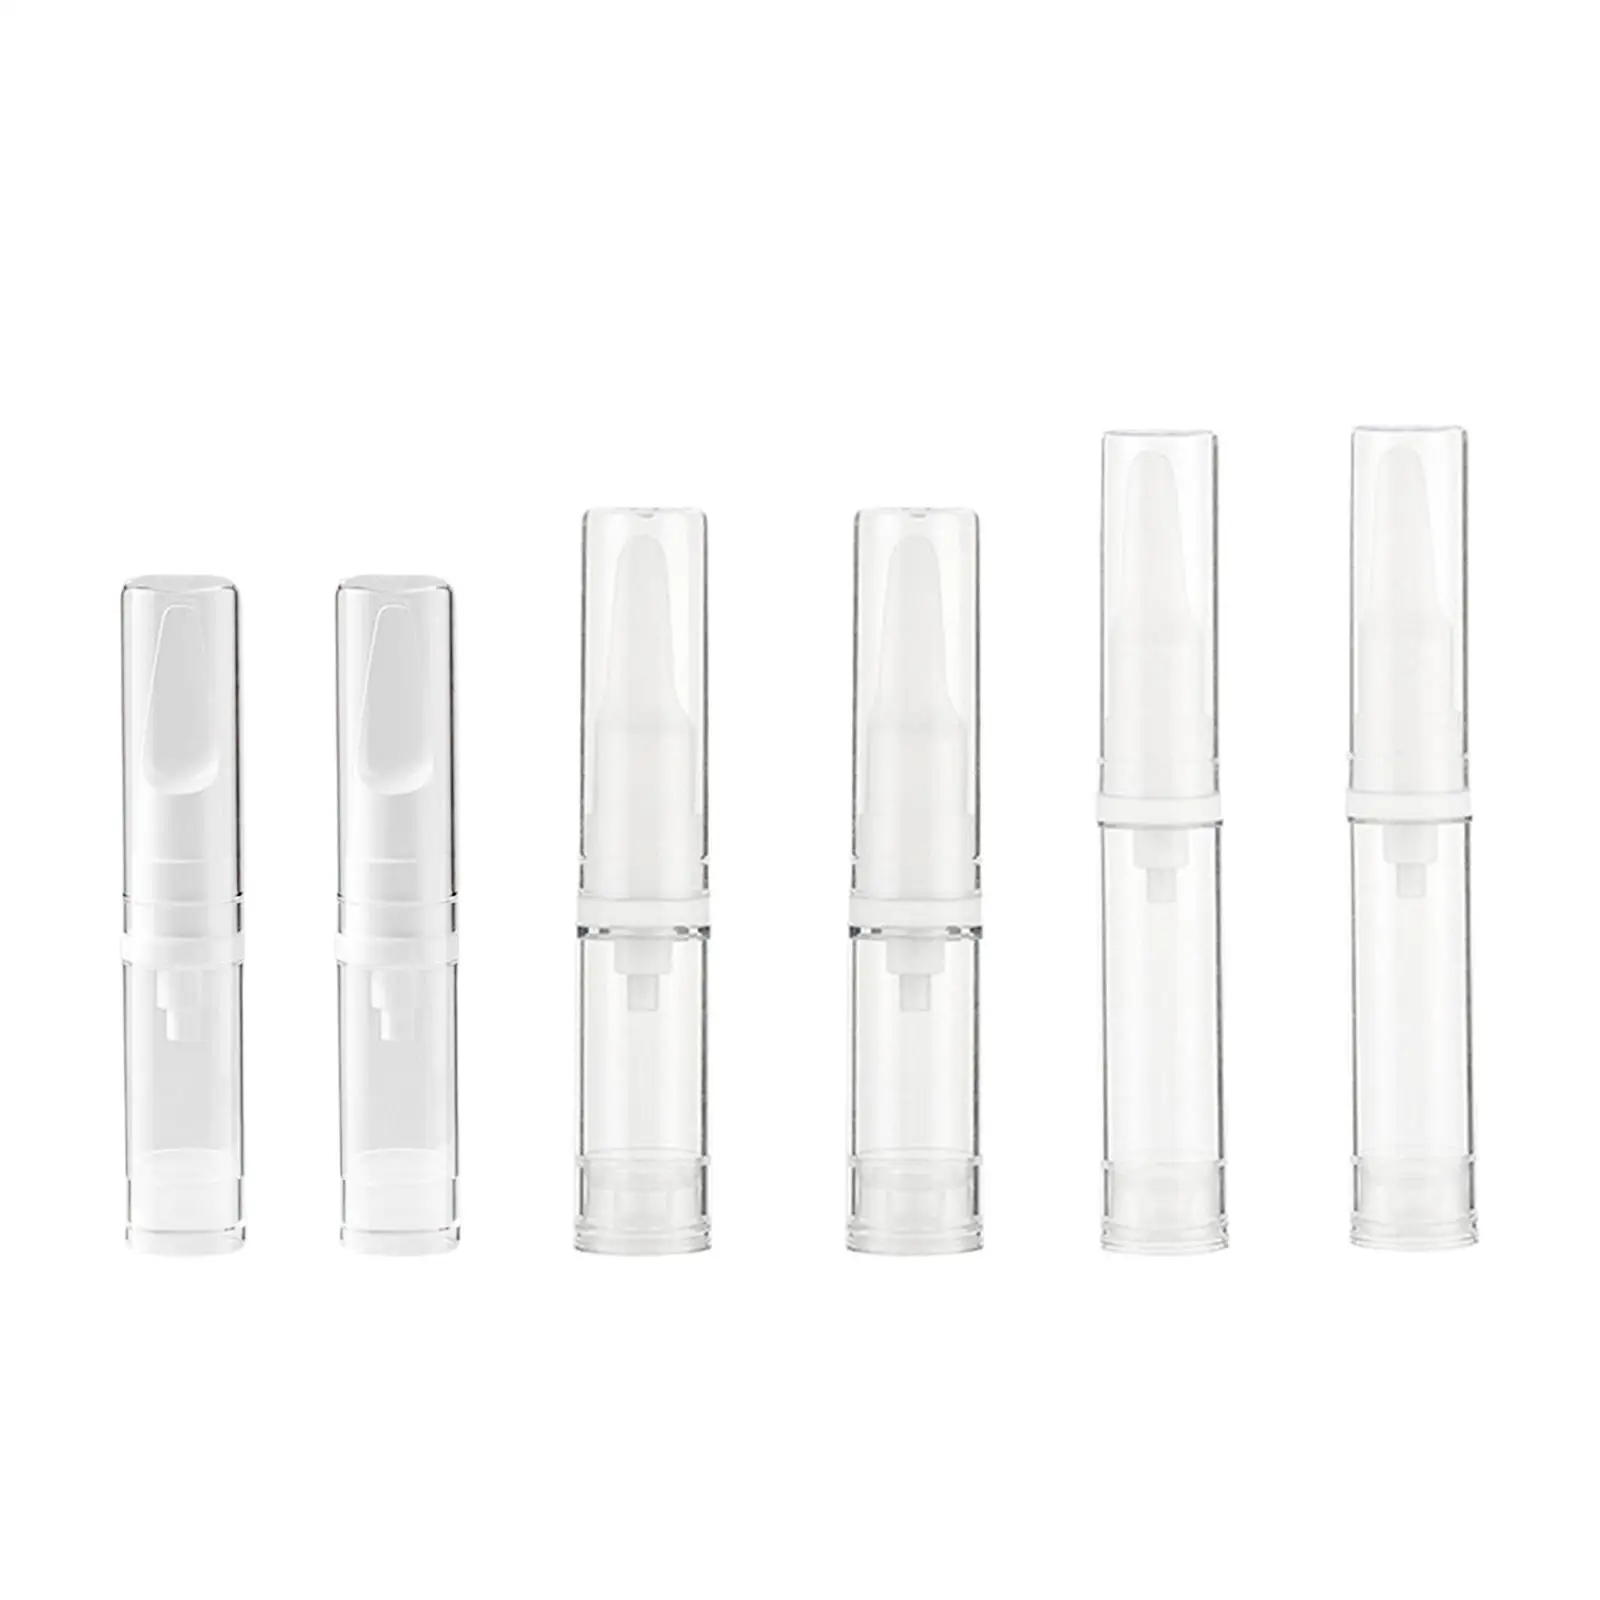 

2Pcs Vacuum Bottles Portable Toiletries Liquid Storage Container Sample Packing Foundations Airless Lotion Pump Bottles